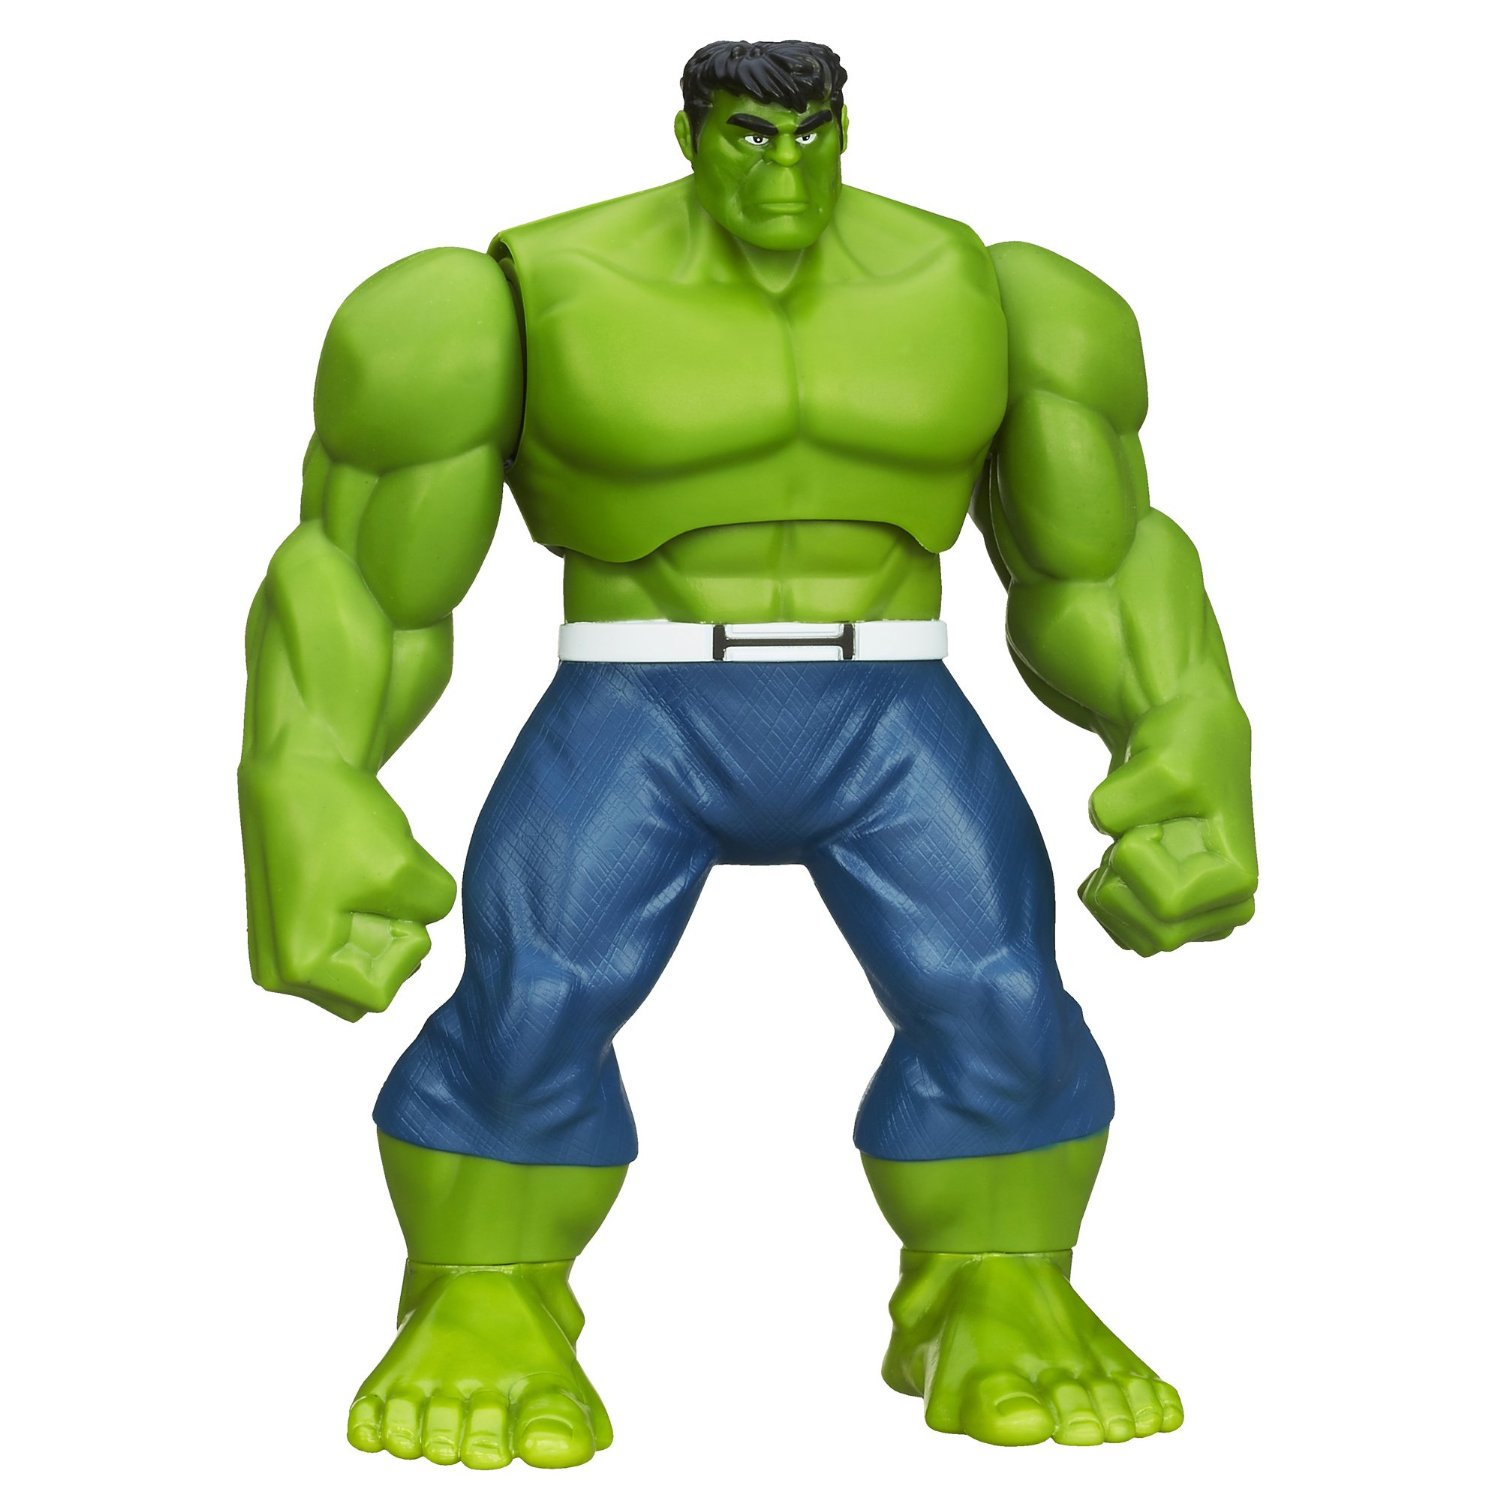 Marvel Hulk and the Agents of S.M.A.S.H. Shake 'N Smash Hulk Figure